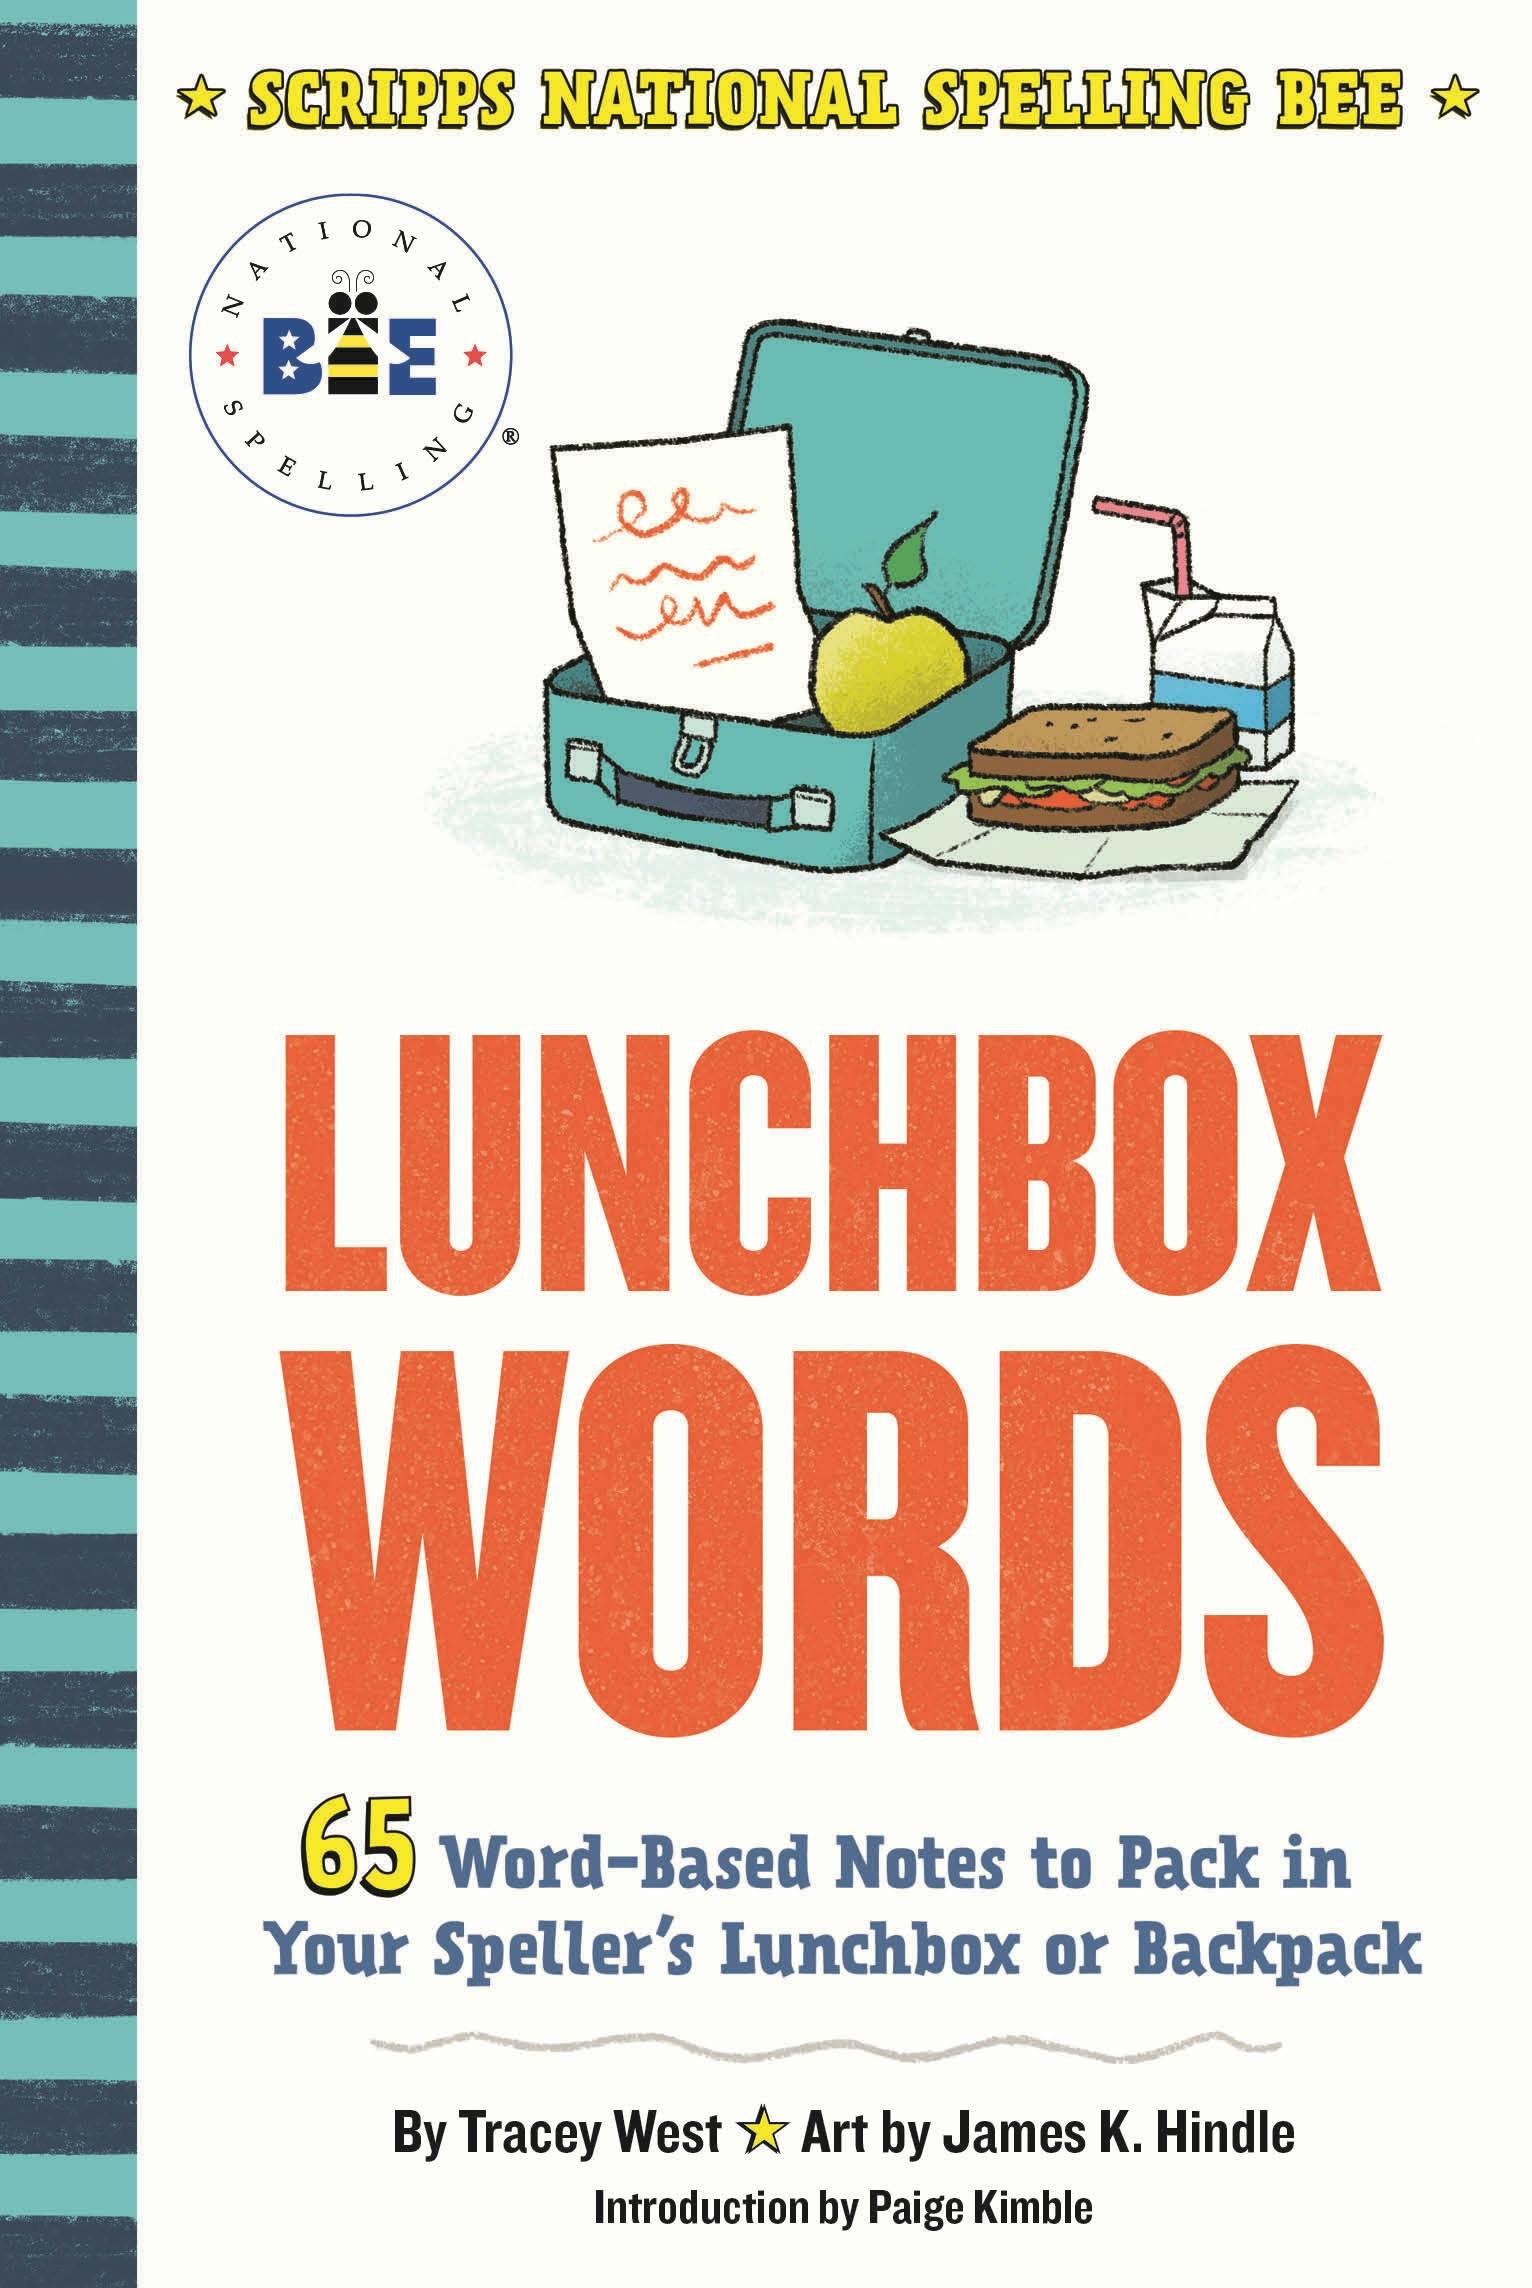 Lunchbox Words